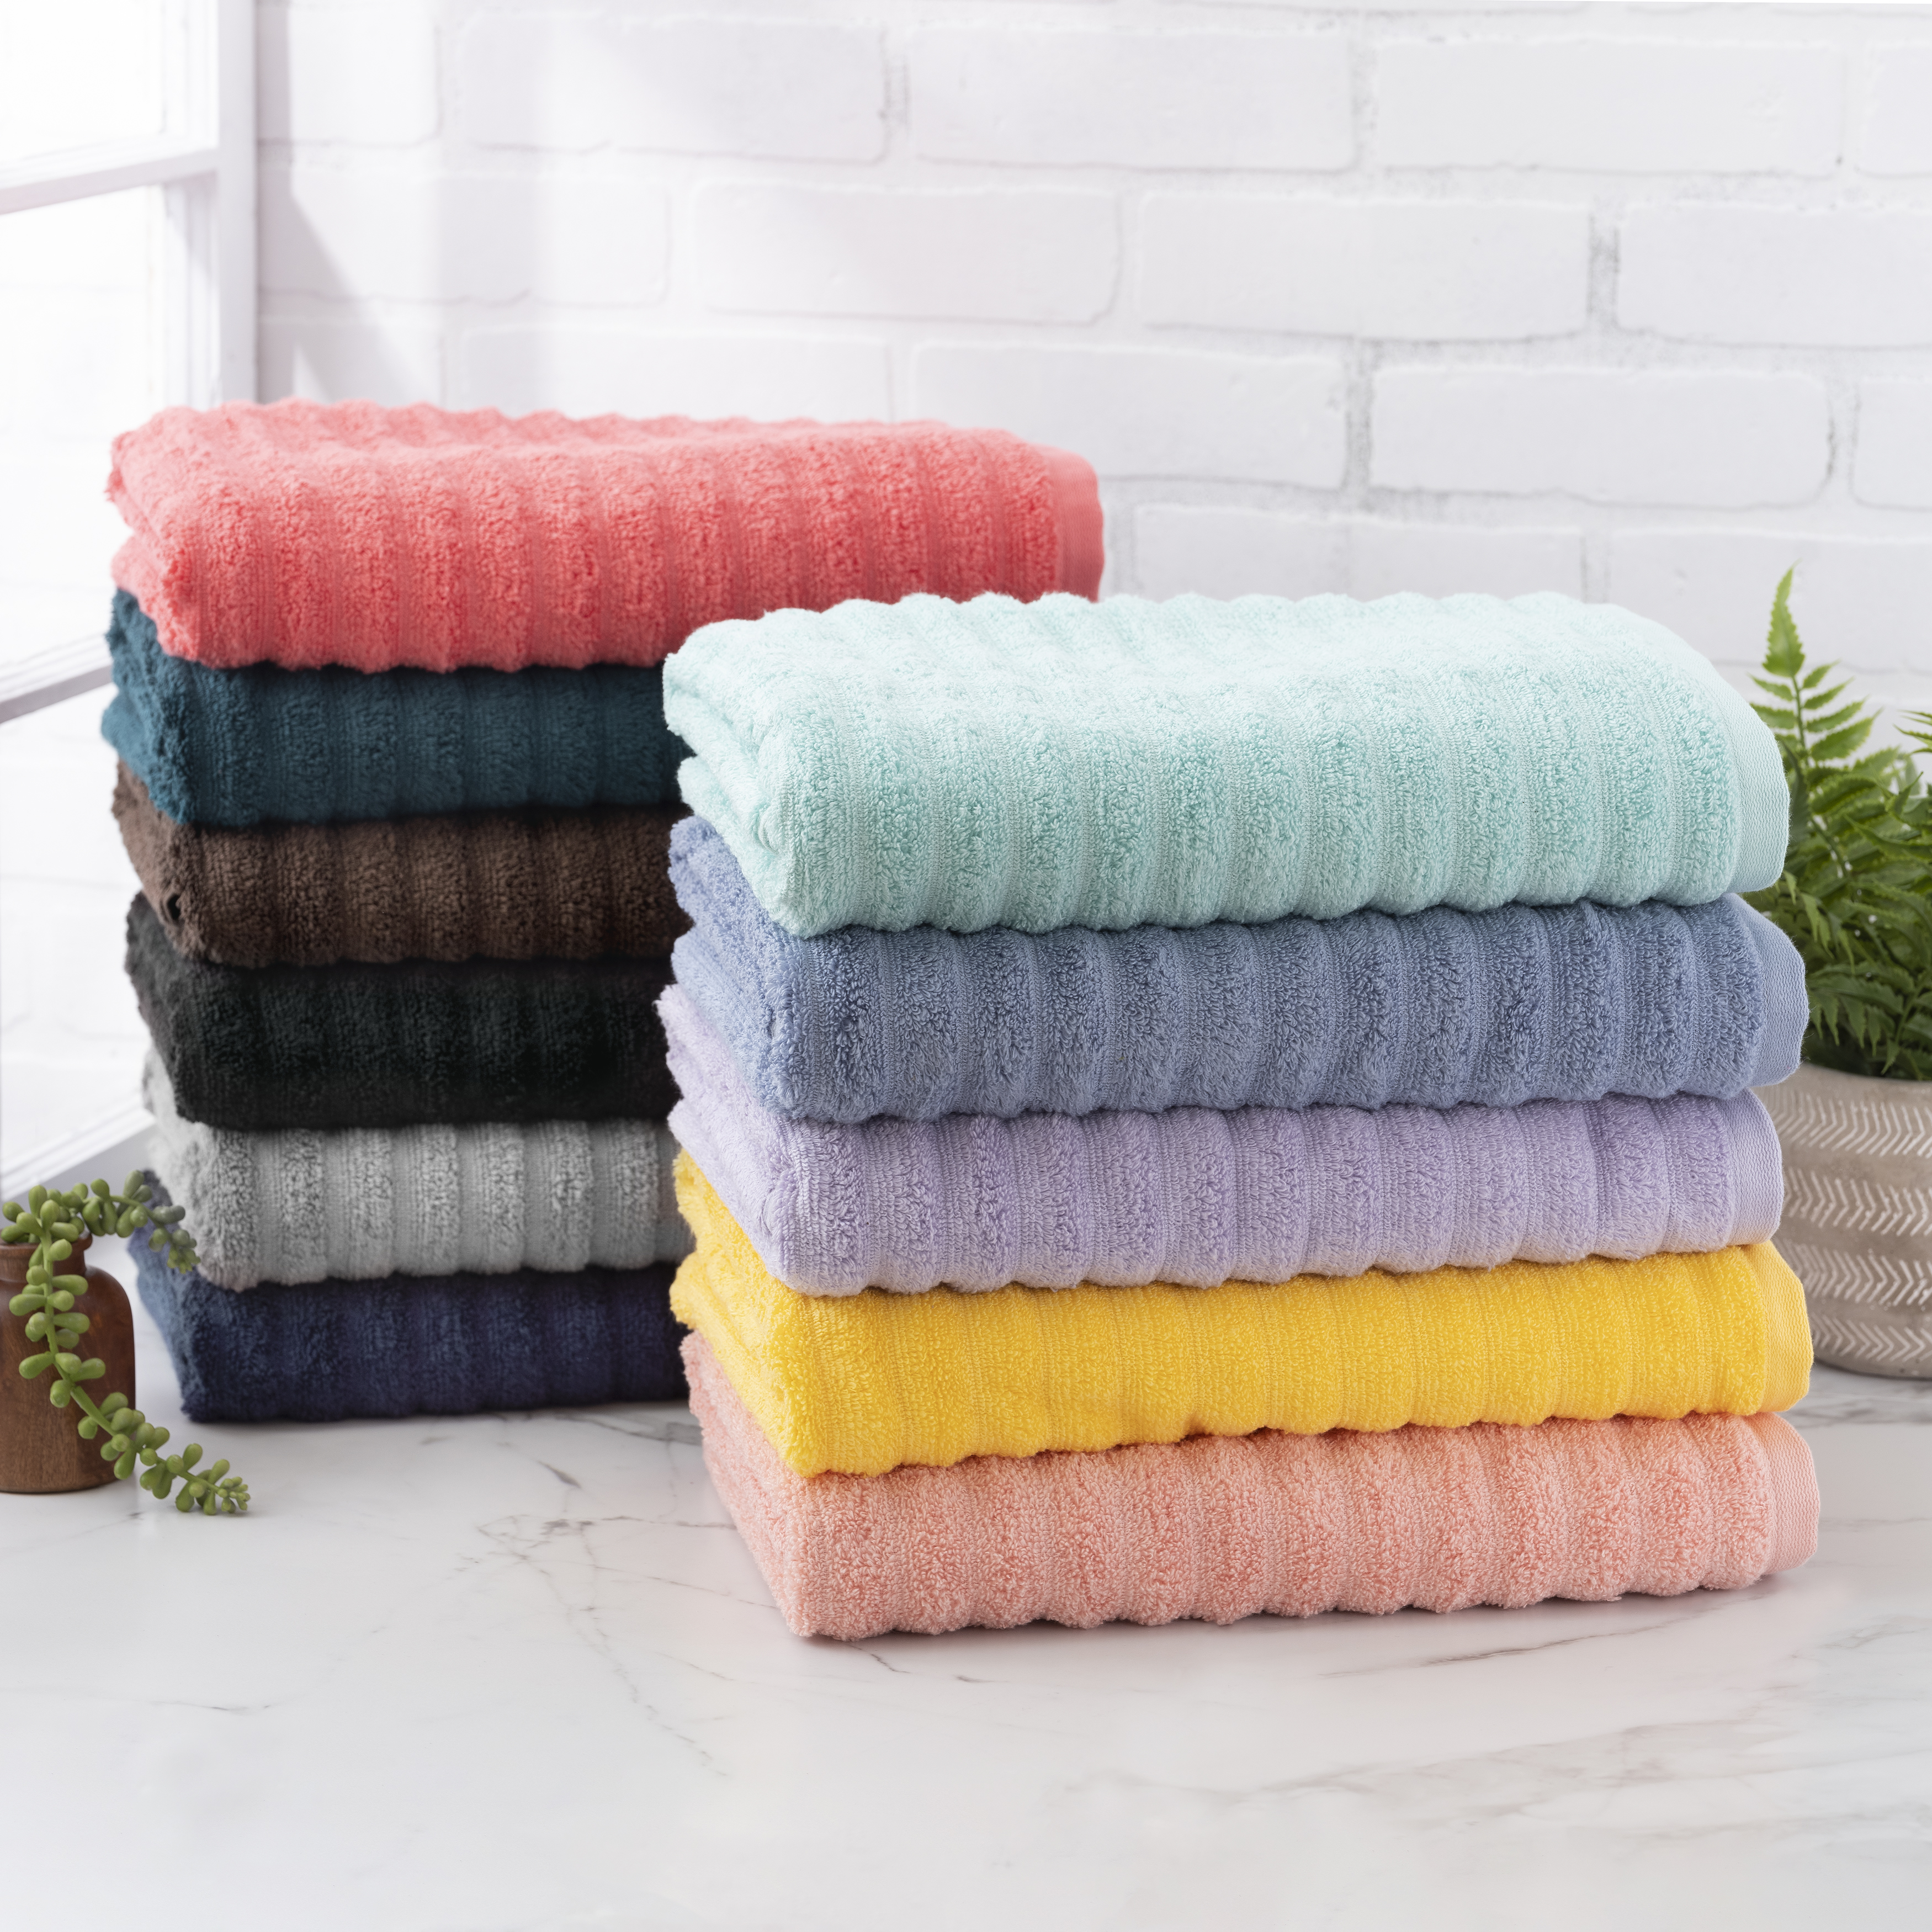 Mainstays Performance 6-Piece Towel set, Textured Grey Flannel - image 3 of 7